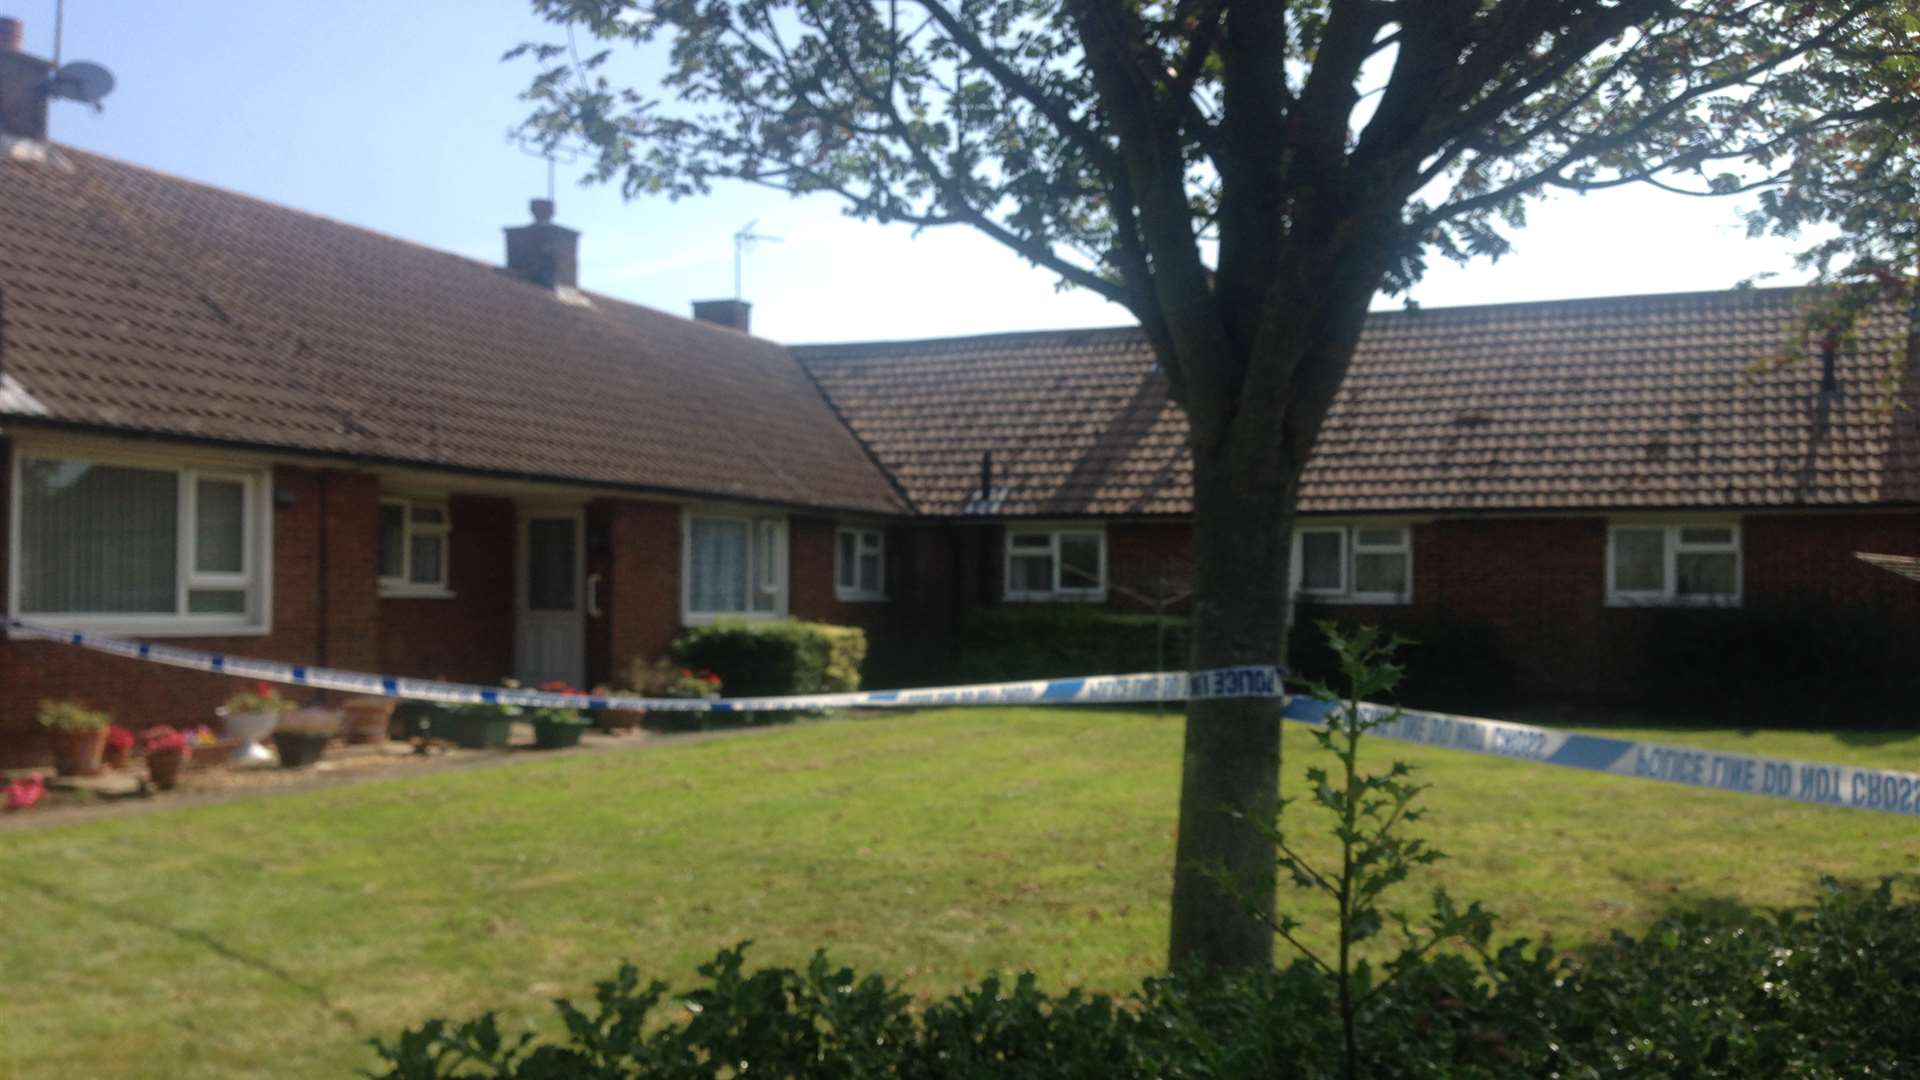 A row of bungalows in Allenby Road were cordoned off. Picture: Kiran Kaur